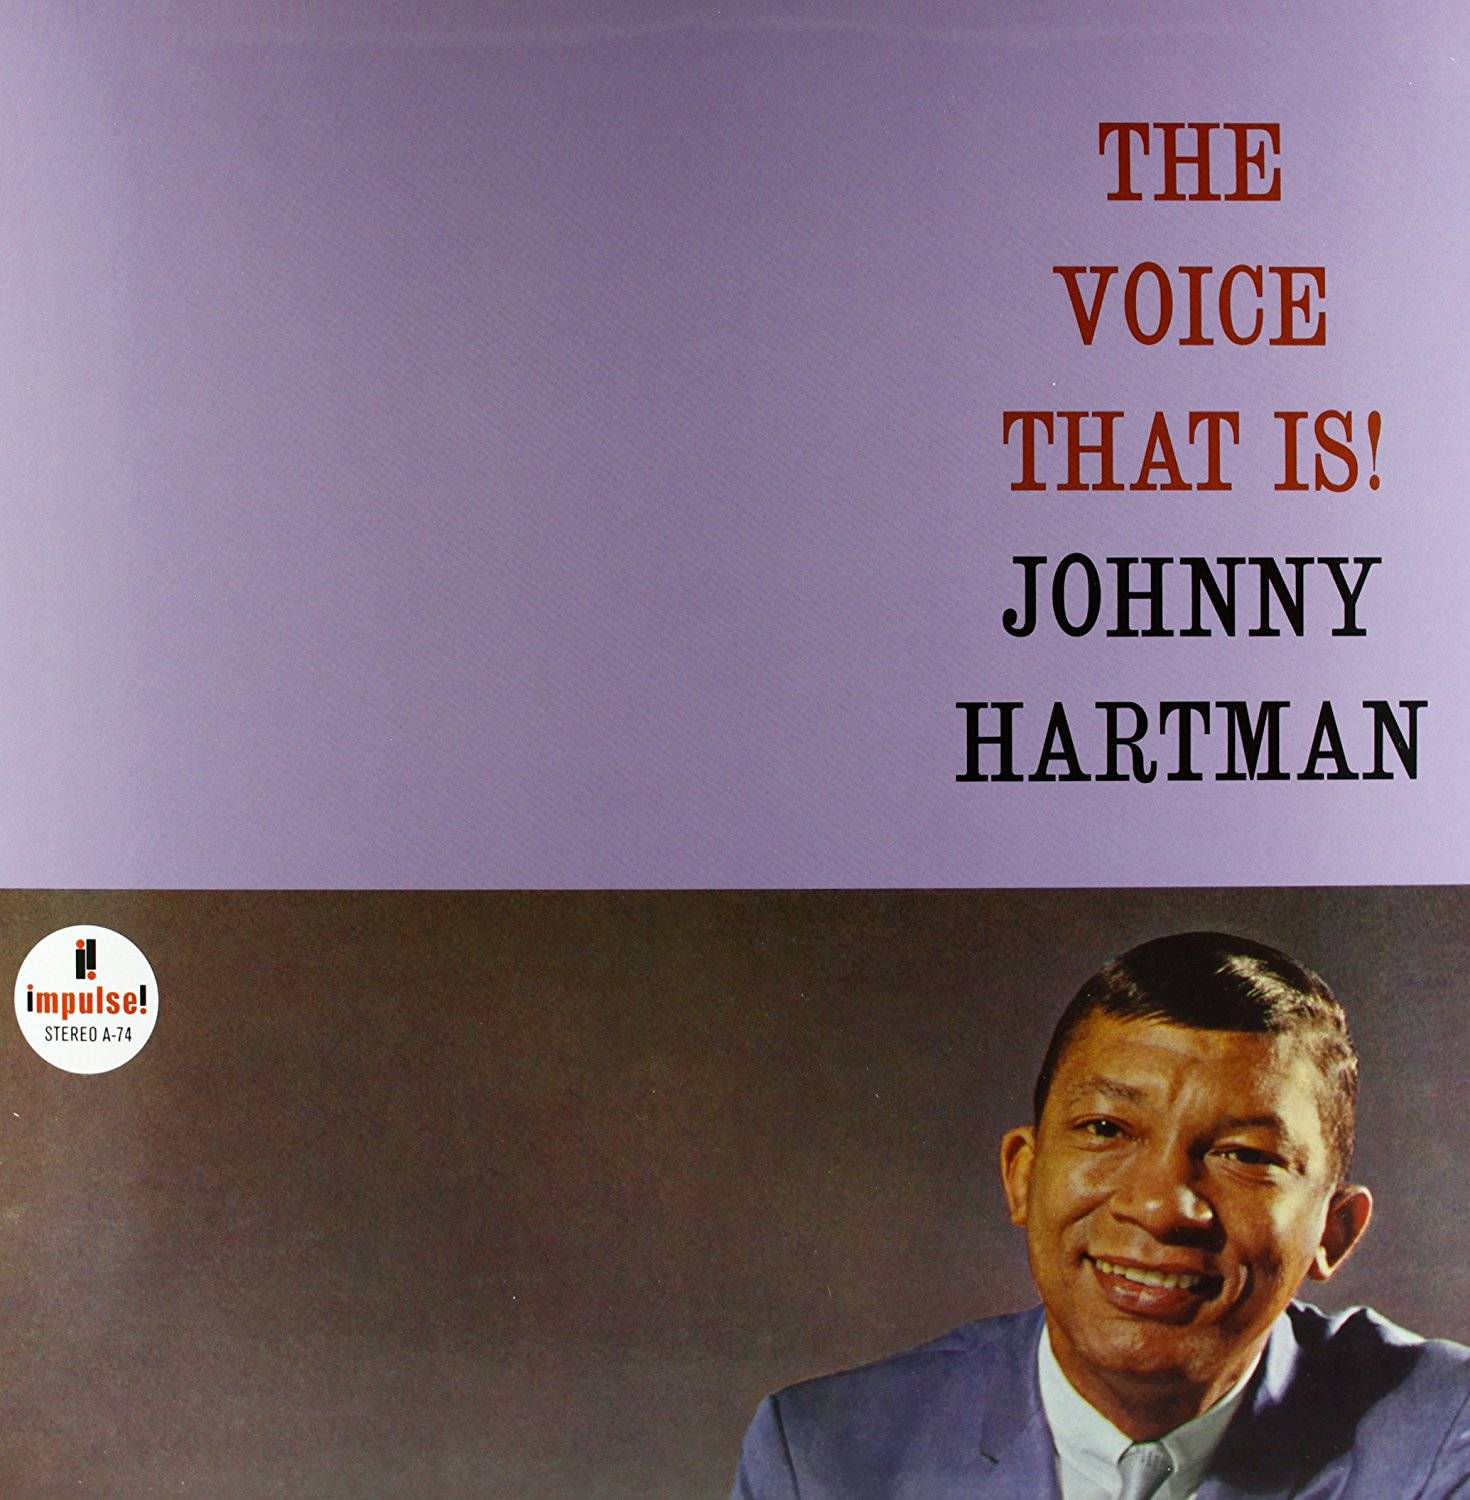 Johnny Hartman - The Voice That Is (1964) [Analogue Productions 2012] [SACD ISO + DSF DSD64 + Hi-Res FLAC] Download